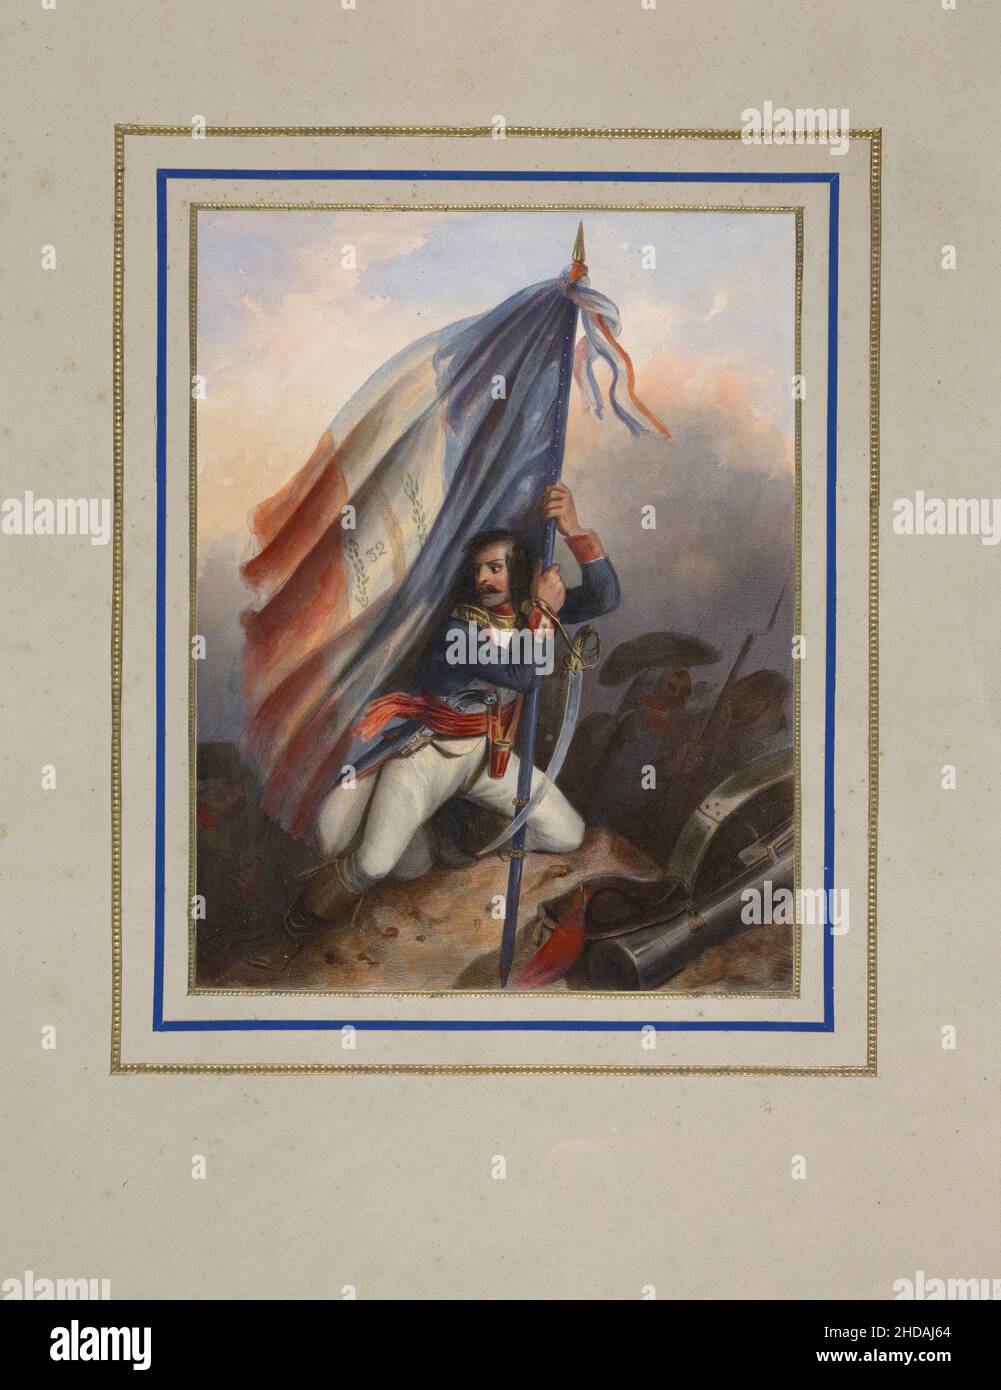 Vintage color lithograph of French Revolution: The Alps, Little St Bernard's Redoubt, revolutionary officer with the banner of the First French republ Stock Photo